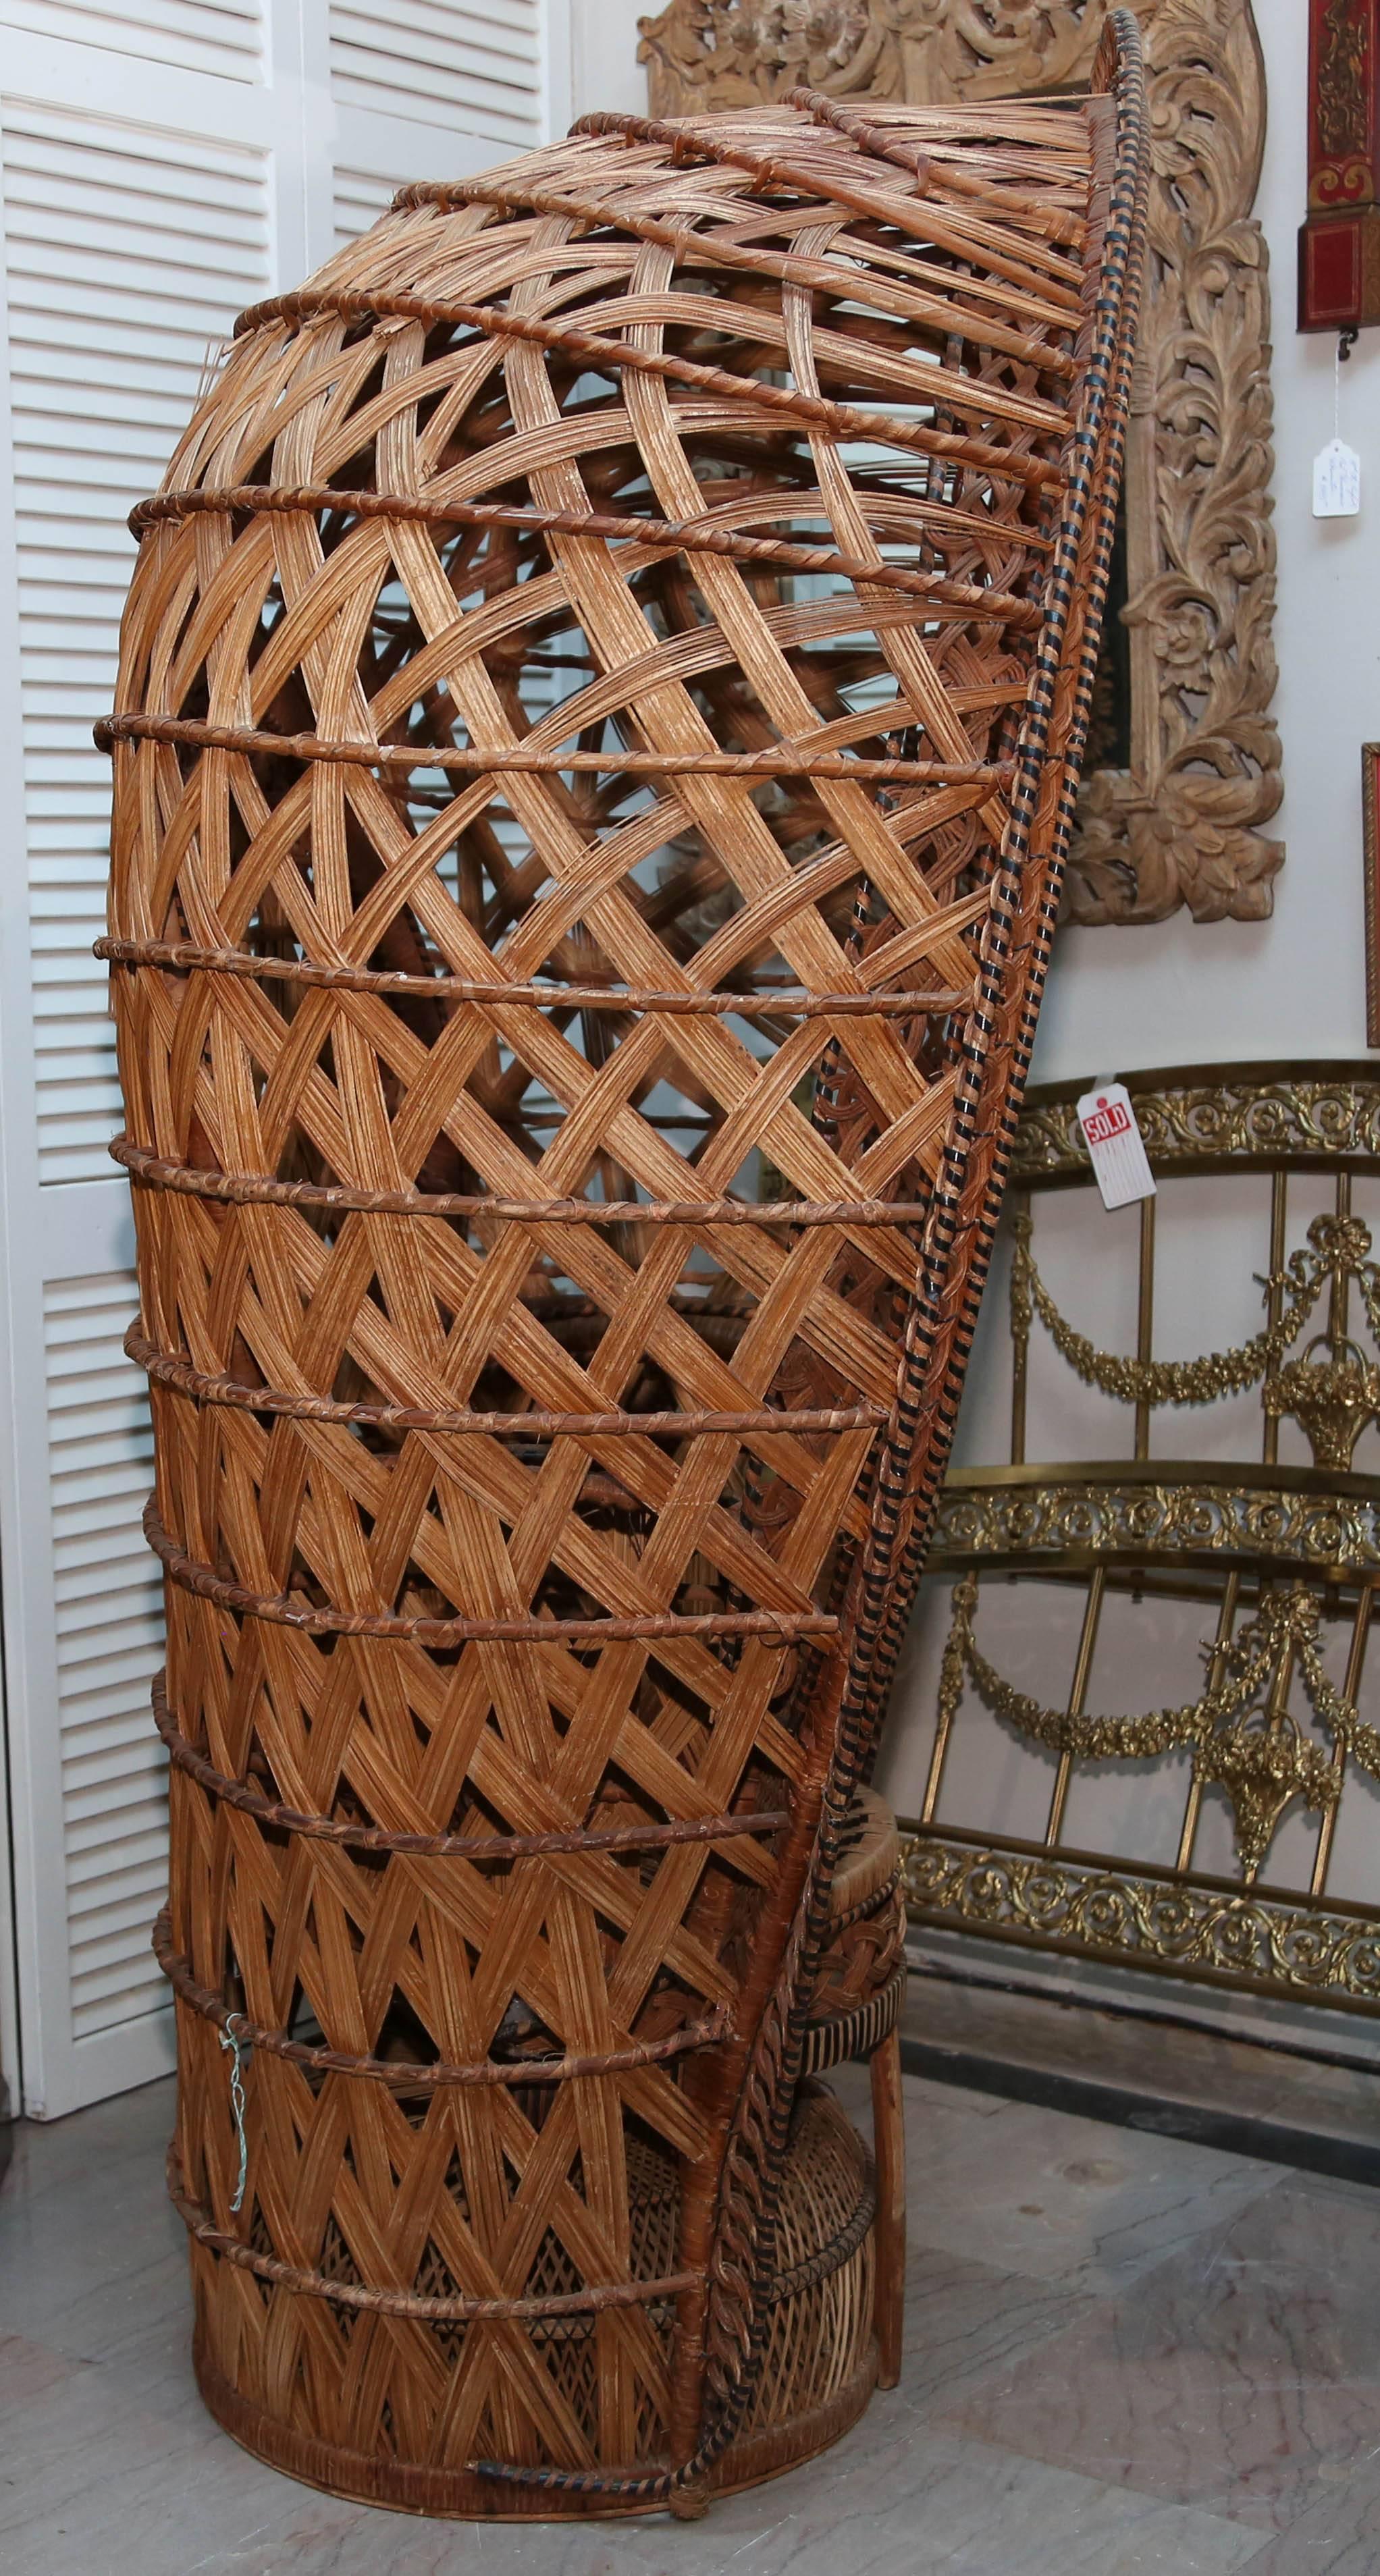 Wicker Quintessential Anglo-Indian 